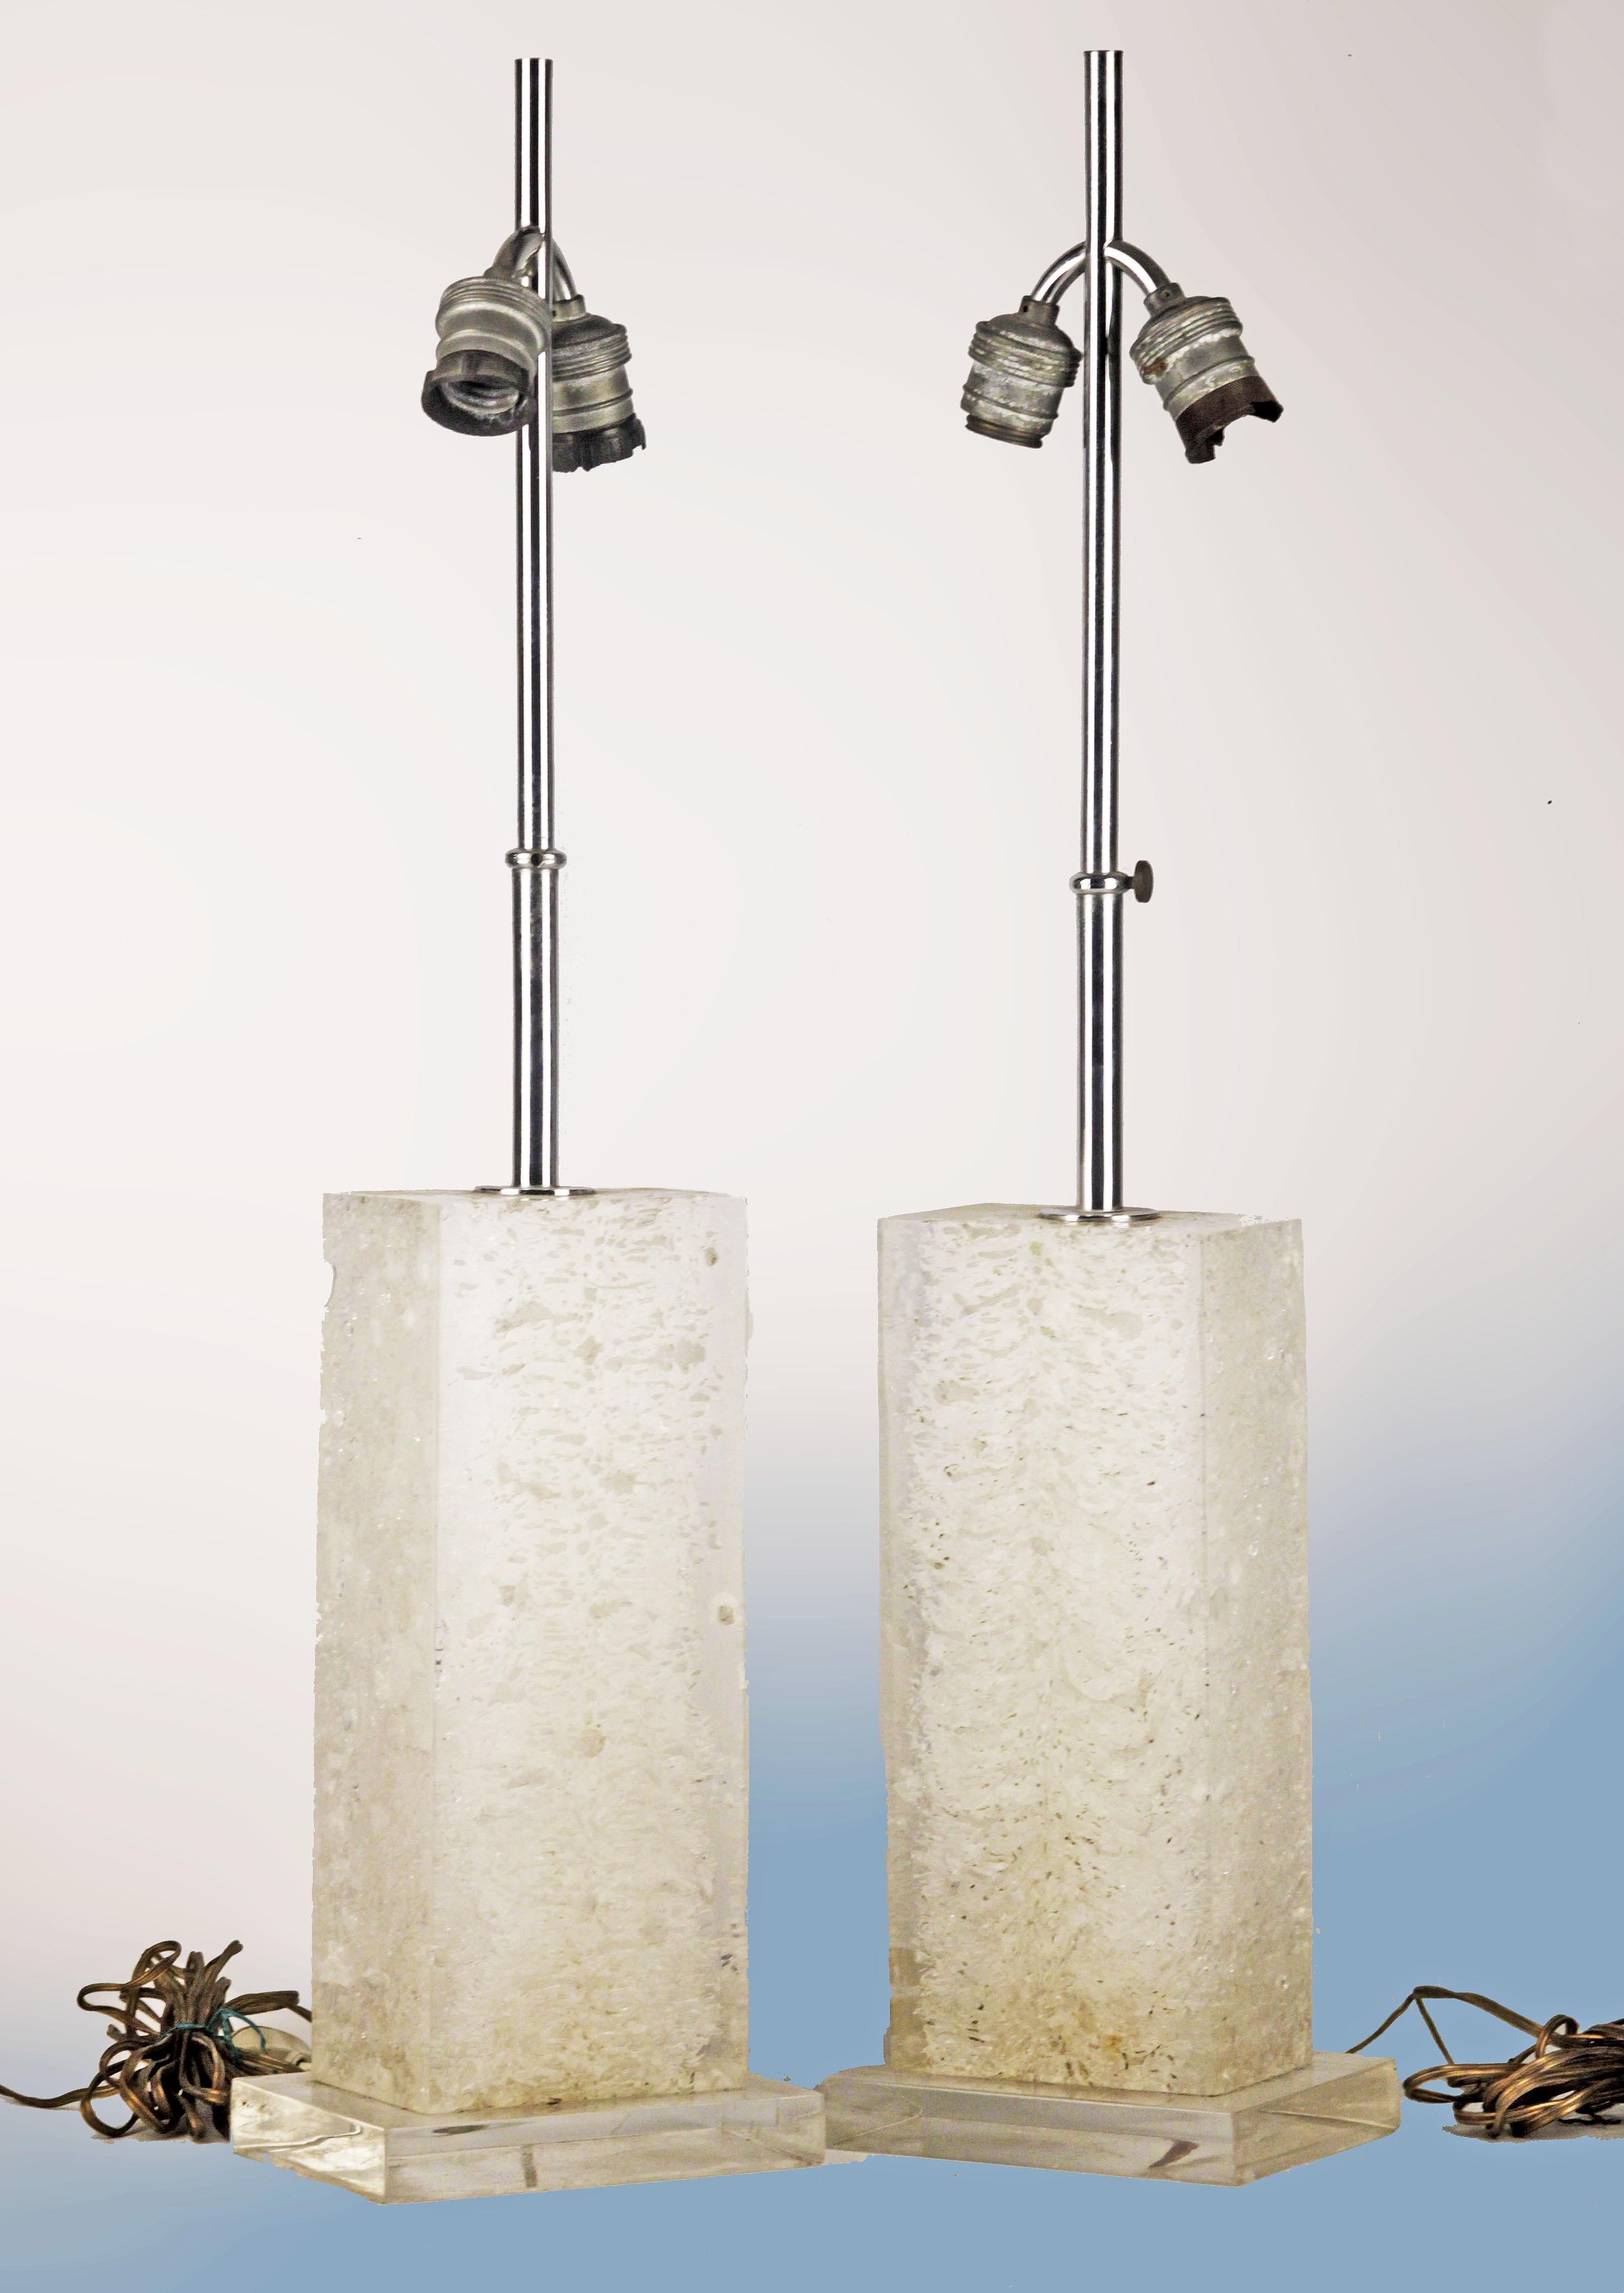 Pair of Industrial design table lamps with translucent acrylic rectangular prism shaped plinths

By: unknown
Material: acrylic, cord, metal, synthetic, plastic
Technique: cast, forged, molded, polished, metalwork
Dimensions: 4.5 in x 6.5 in x 27.5